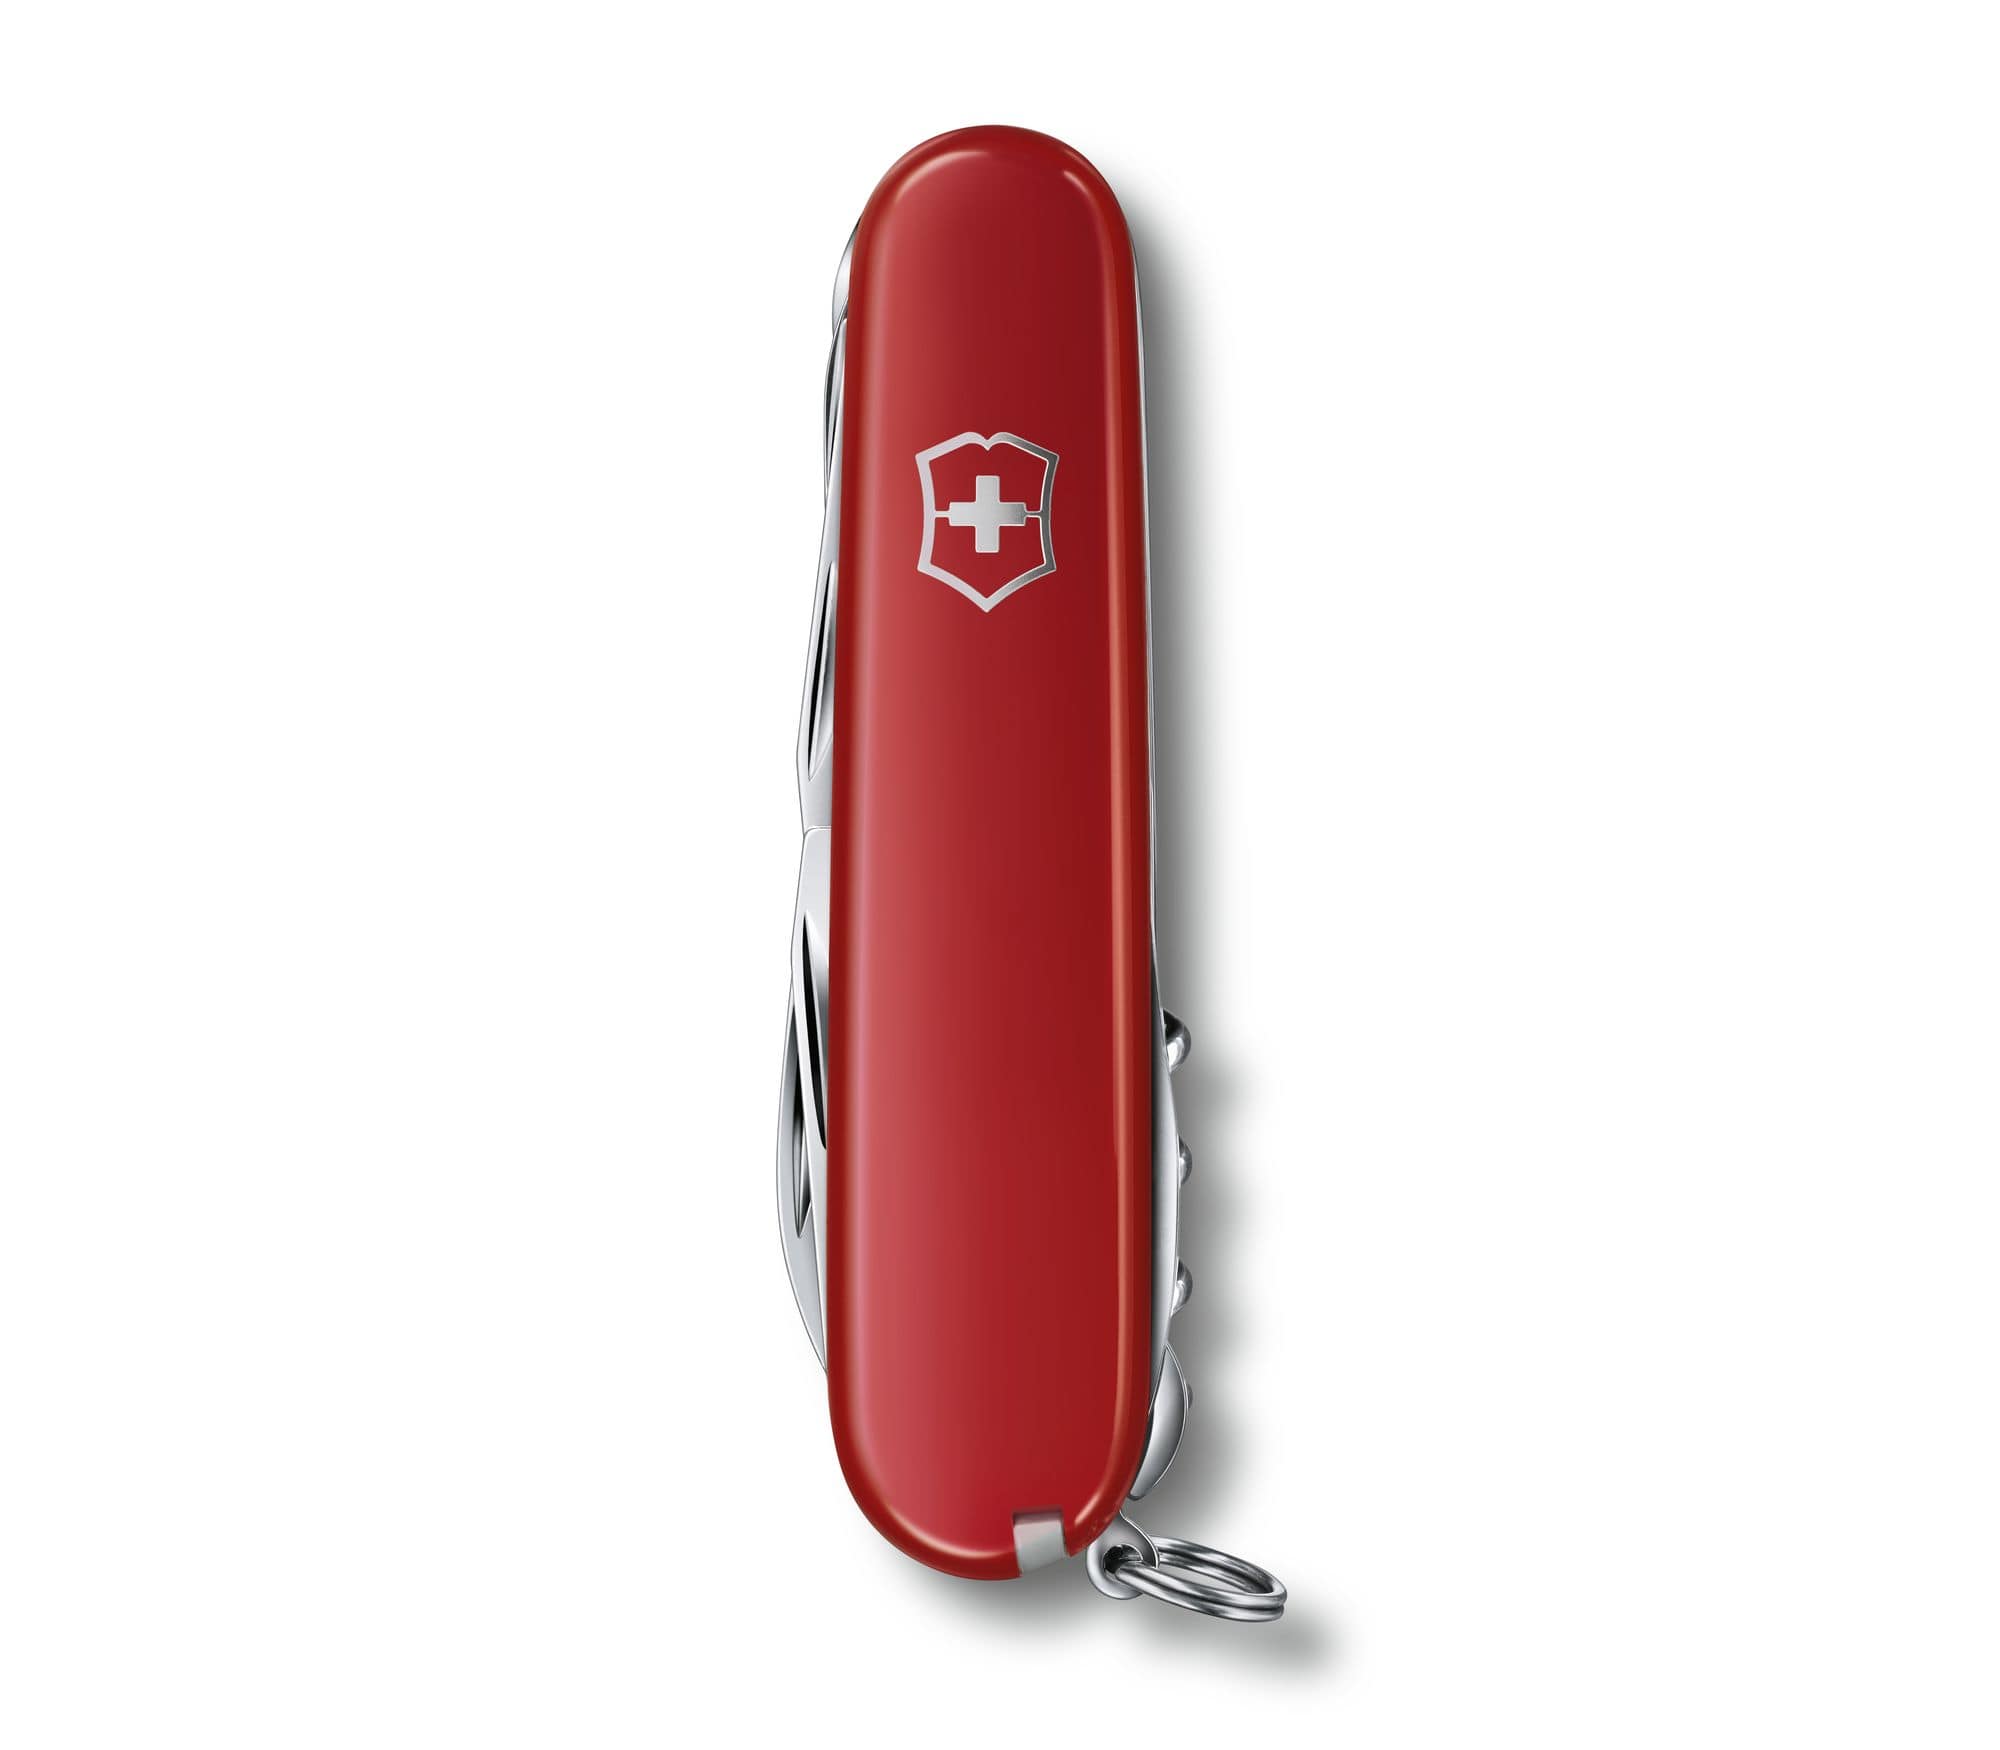 Victorinox Swiss Army Knife Huntsman 91mm Red With 15 Functions - 1.3713/B1